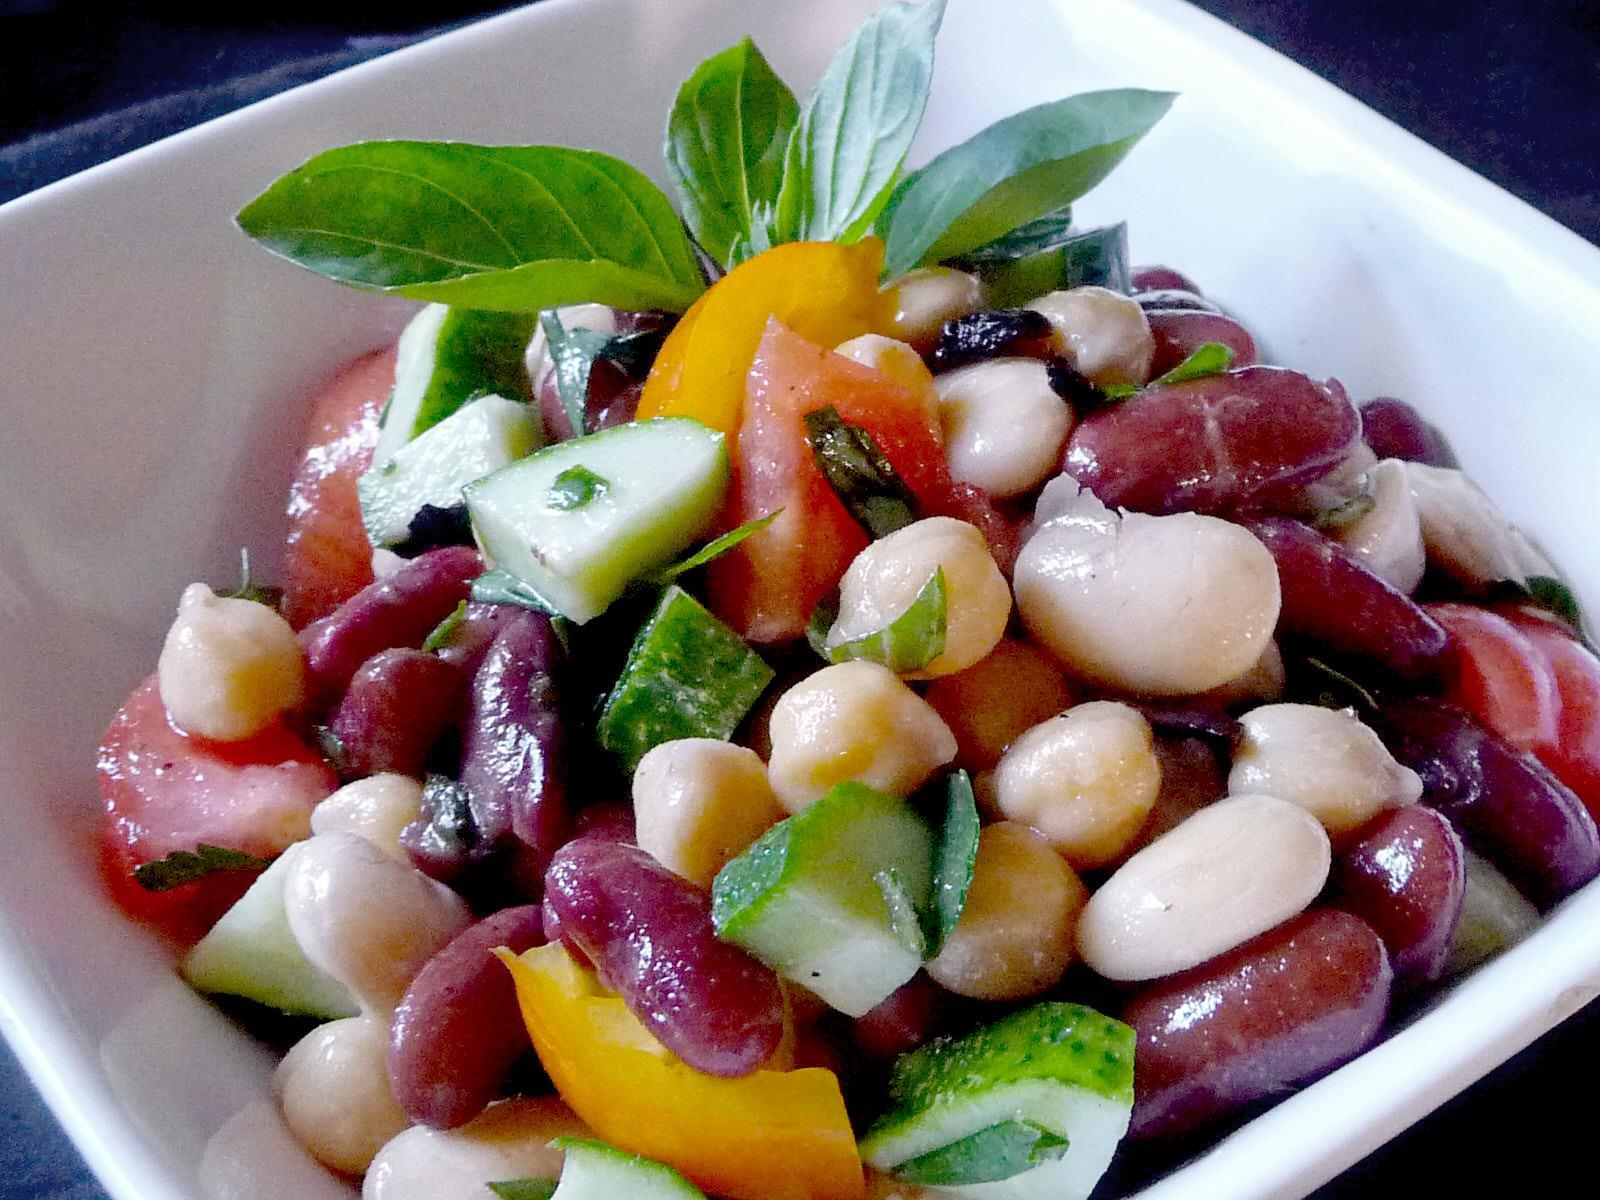 Mediterranean Mixed Bean Salad with Heirloom Tomatoes and Herbs